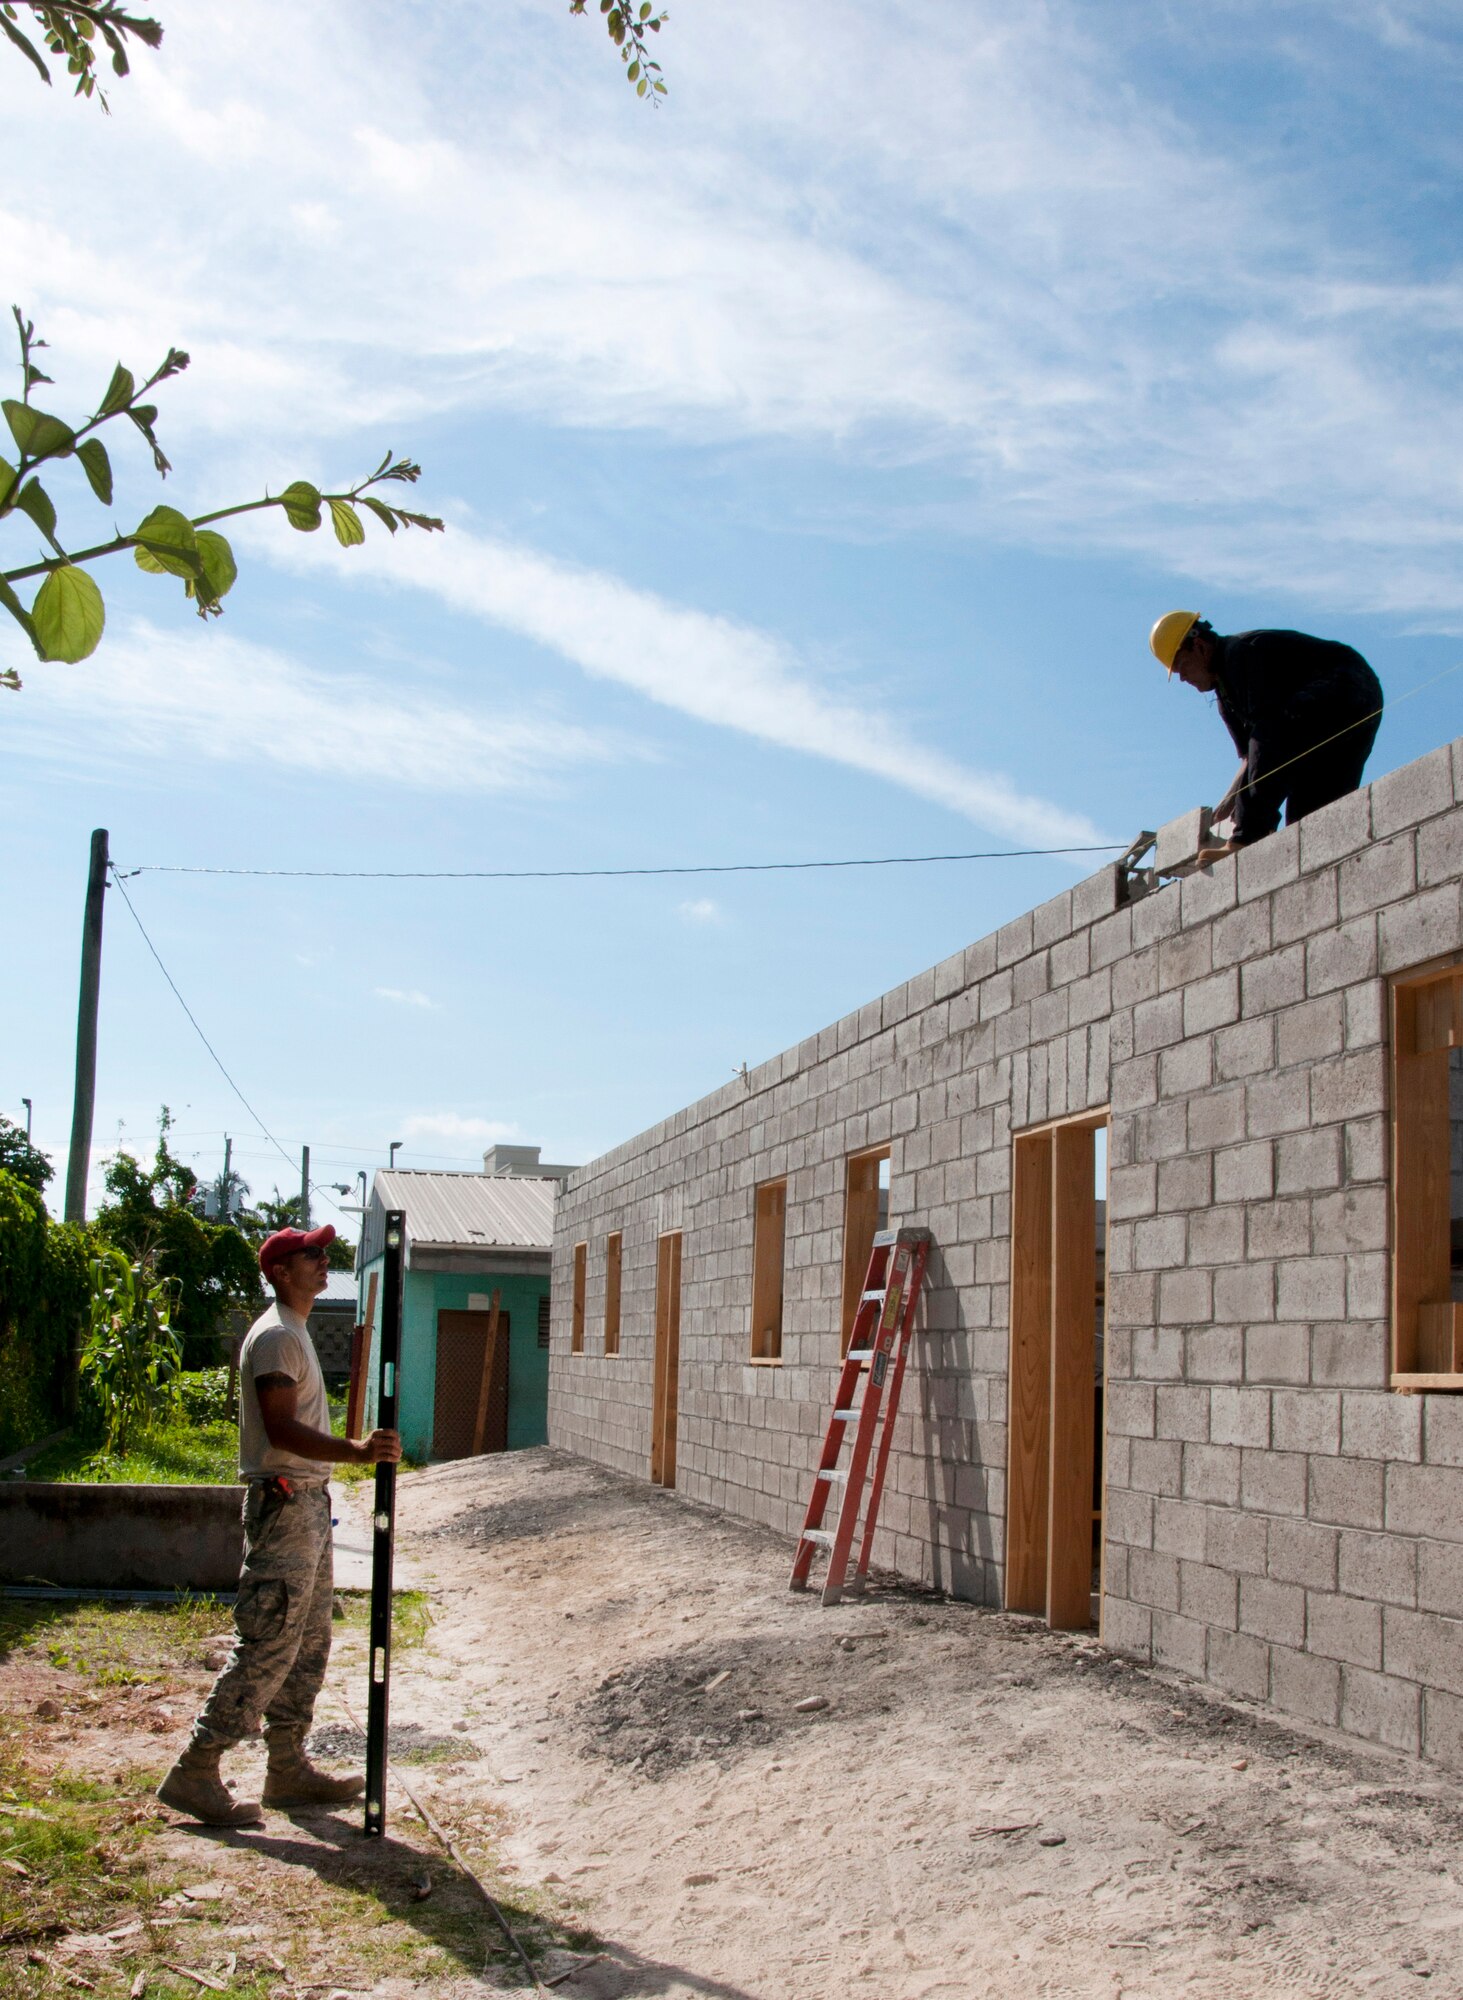 U.S. Air Force Tech. Sgt. Piotr Wilk, New Horizons project manager at the Stella Maris School Belize Academy for the Deaf construction site, left, speaks with a member of the Belize Defence Force assisting with construction at the site April 23, 2014, in Belize City, Belize. BDF and U.S. service members are working together to build five school buildings and one medical facility throughout Belize during New Horizons Belize 2014. New Horizons is an annual event coordinated between the U.S. and the host nation to provide mutual training opportunities. (U.S. Air Force photo by Tech. Sgt. Kali L. Gradishar/Released)